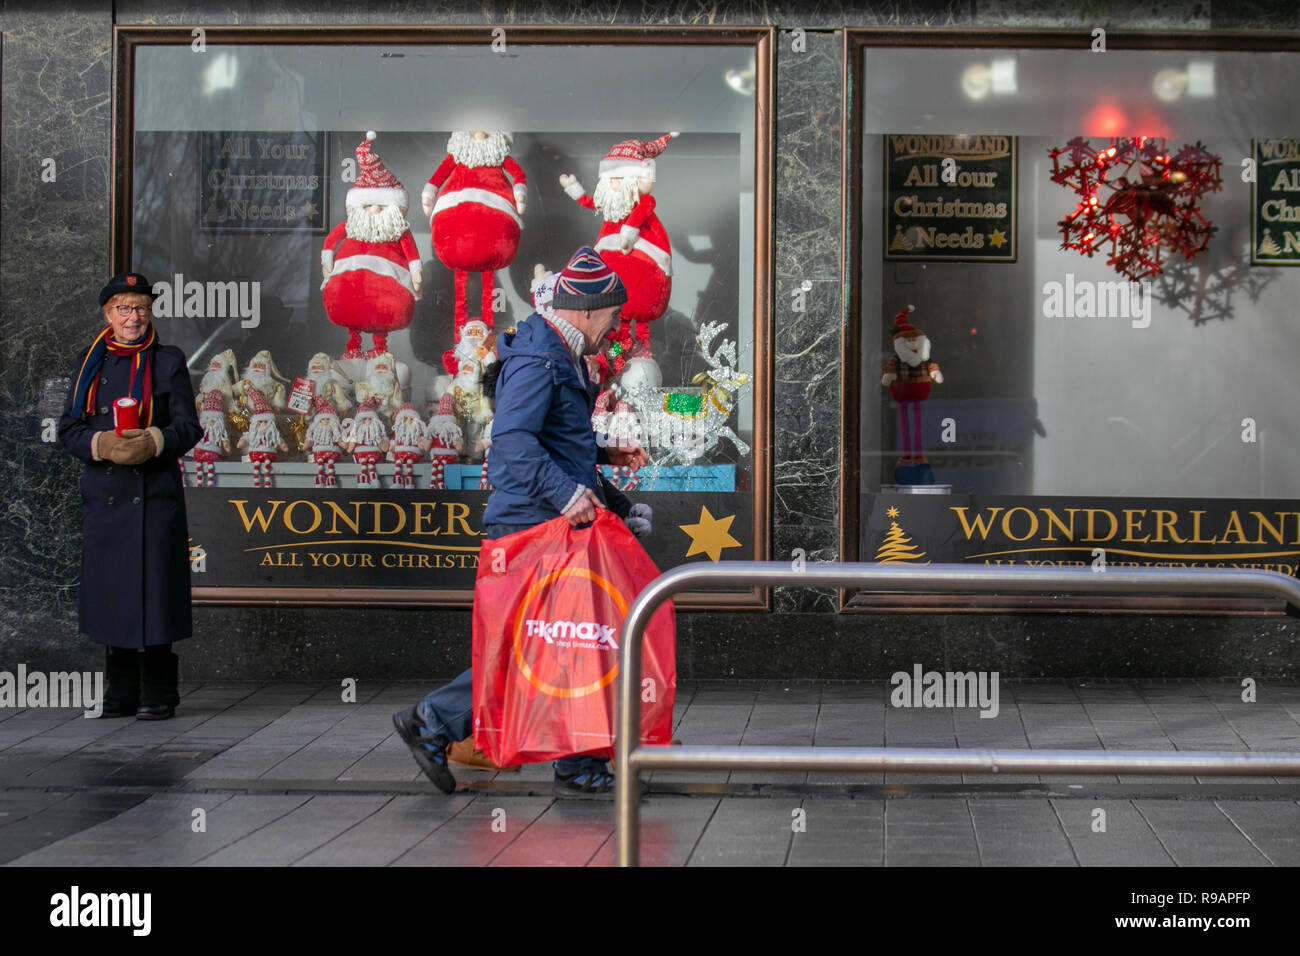 Southport, Merseyside, UK.  22nd Dec, 2018. Salvation Army volunteer and TK Maxx Christmas shopper passing Womde4rland store in the town centre. Credit: MediaWorldImages/Alamy Live News Stock Photo